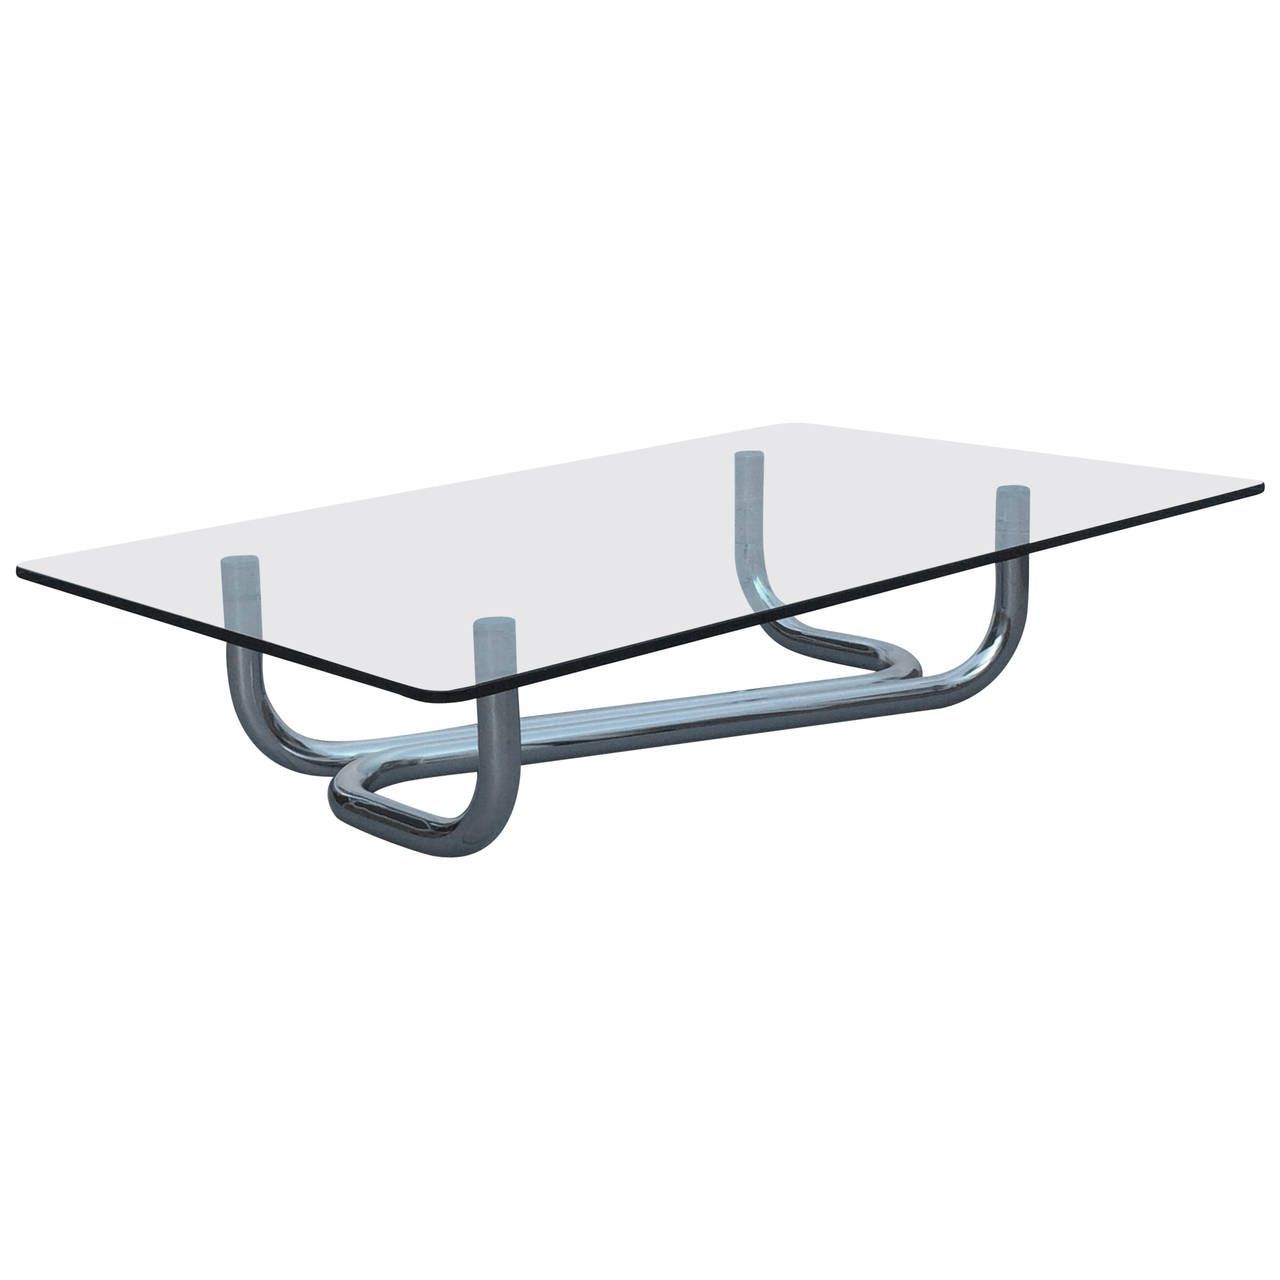 Italian Polished Chrome And Glass Cocktail Table | Glass Intended For Polished Chrome Round Cocktail Tables (View 15 of 15)